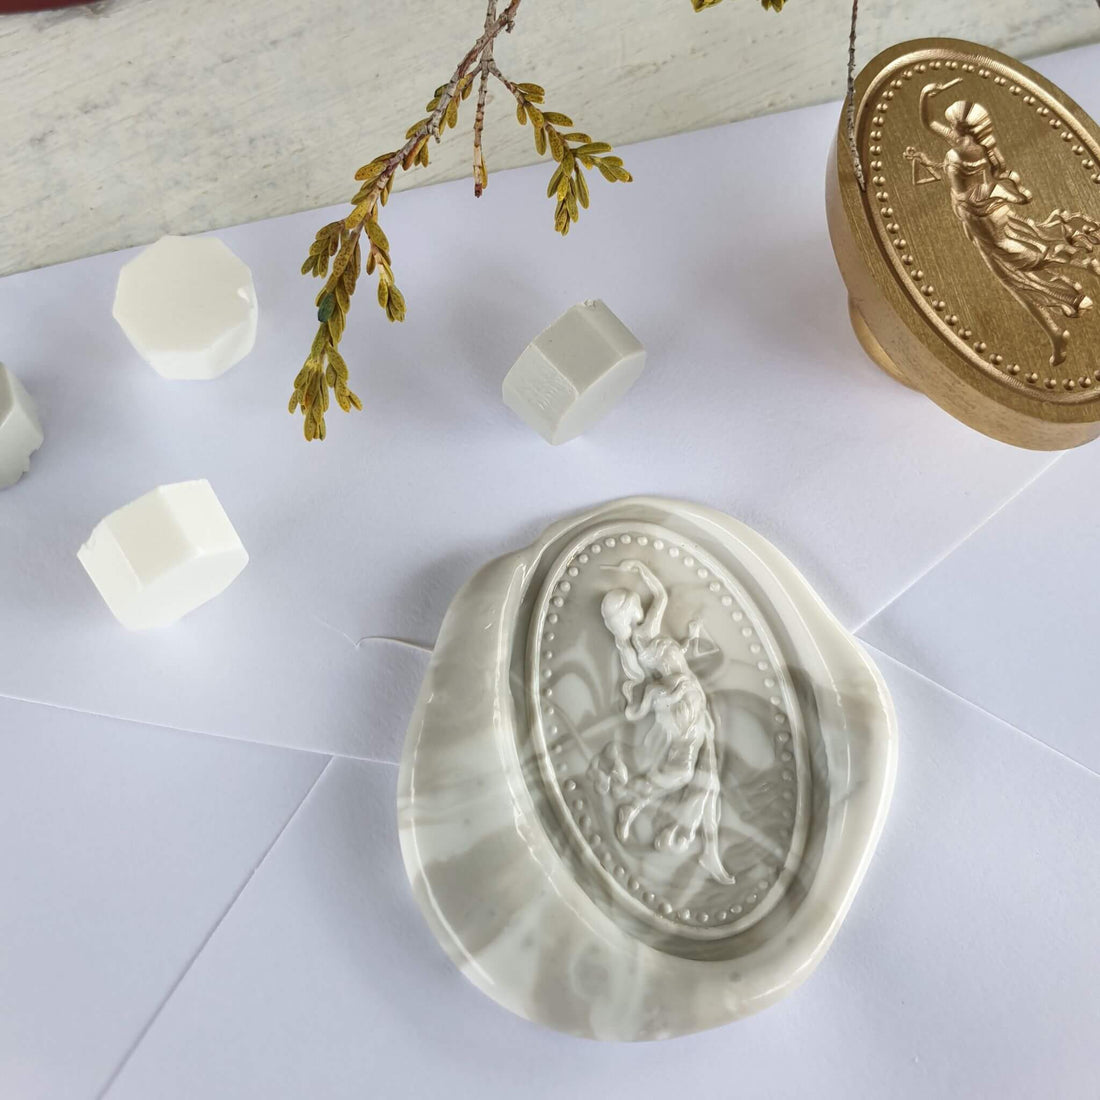 How to Make Marbled Wax Seals - Tips and Tricks